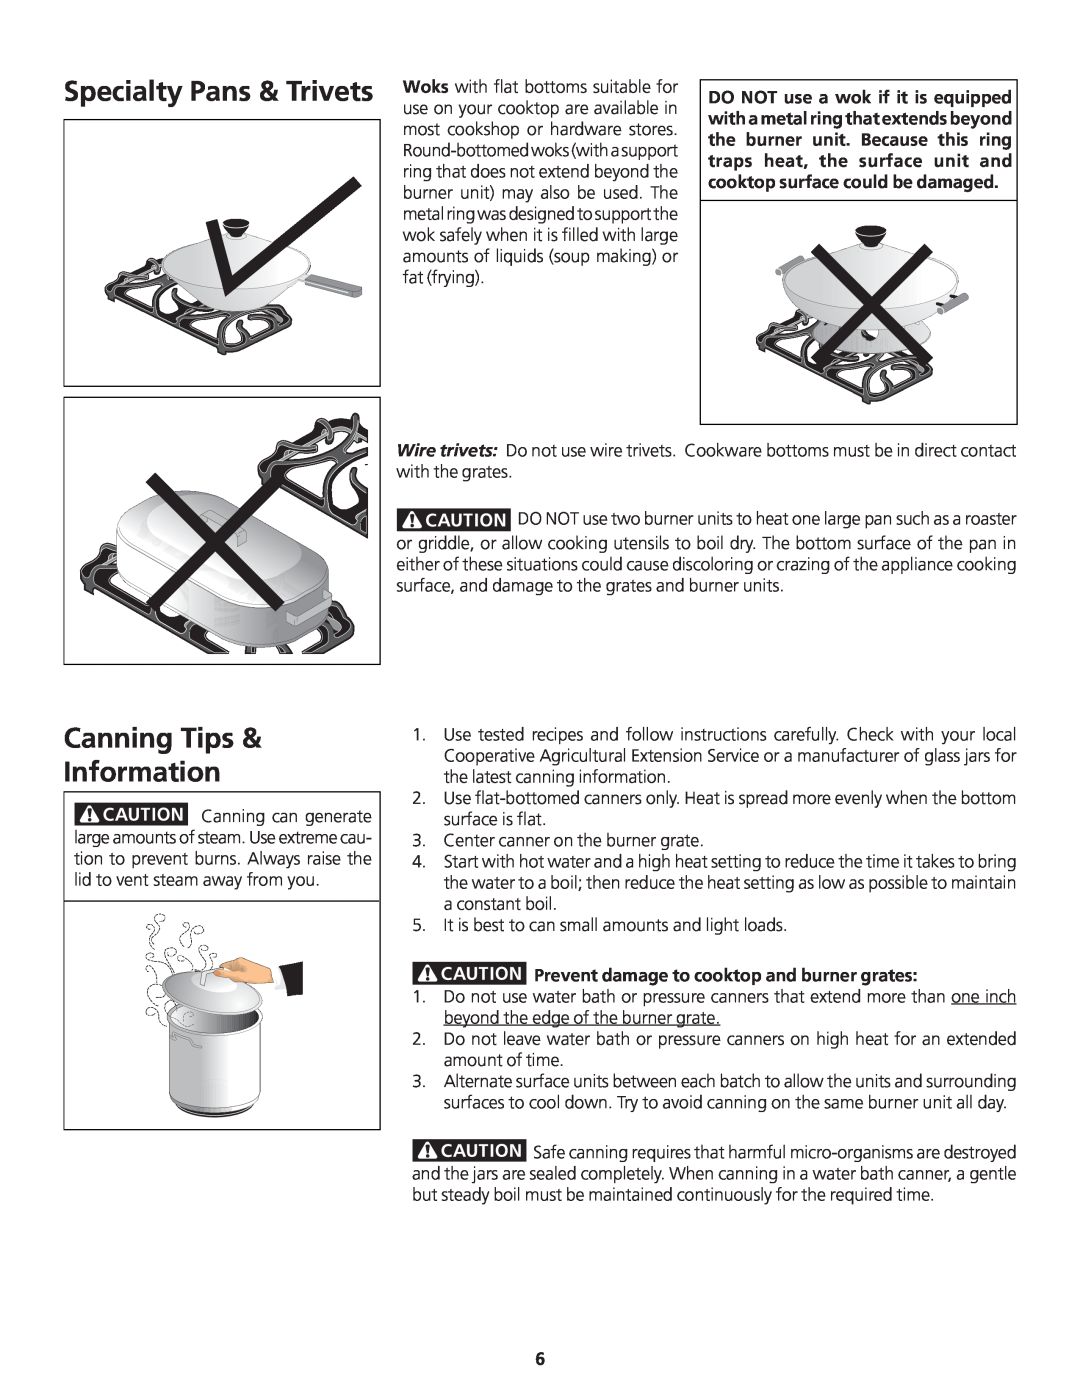 Frigidaire 318200869 manual Canning Tips Information, Prevent damage to cooktop and burner grates 